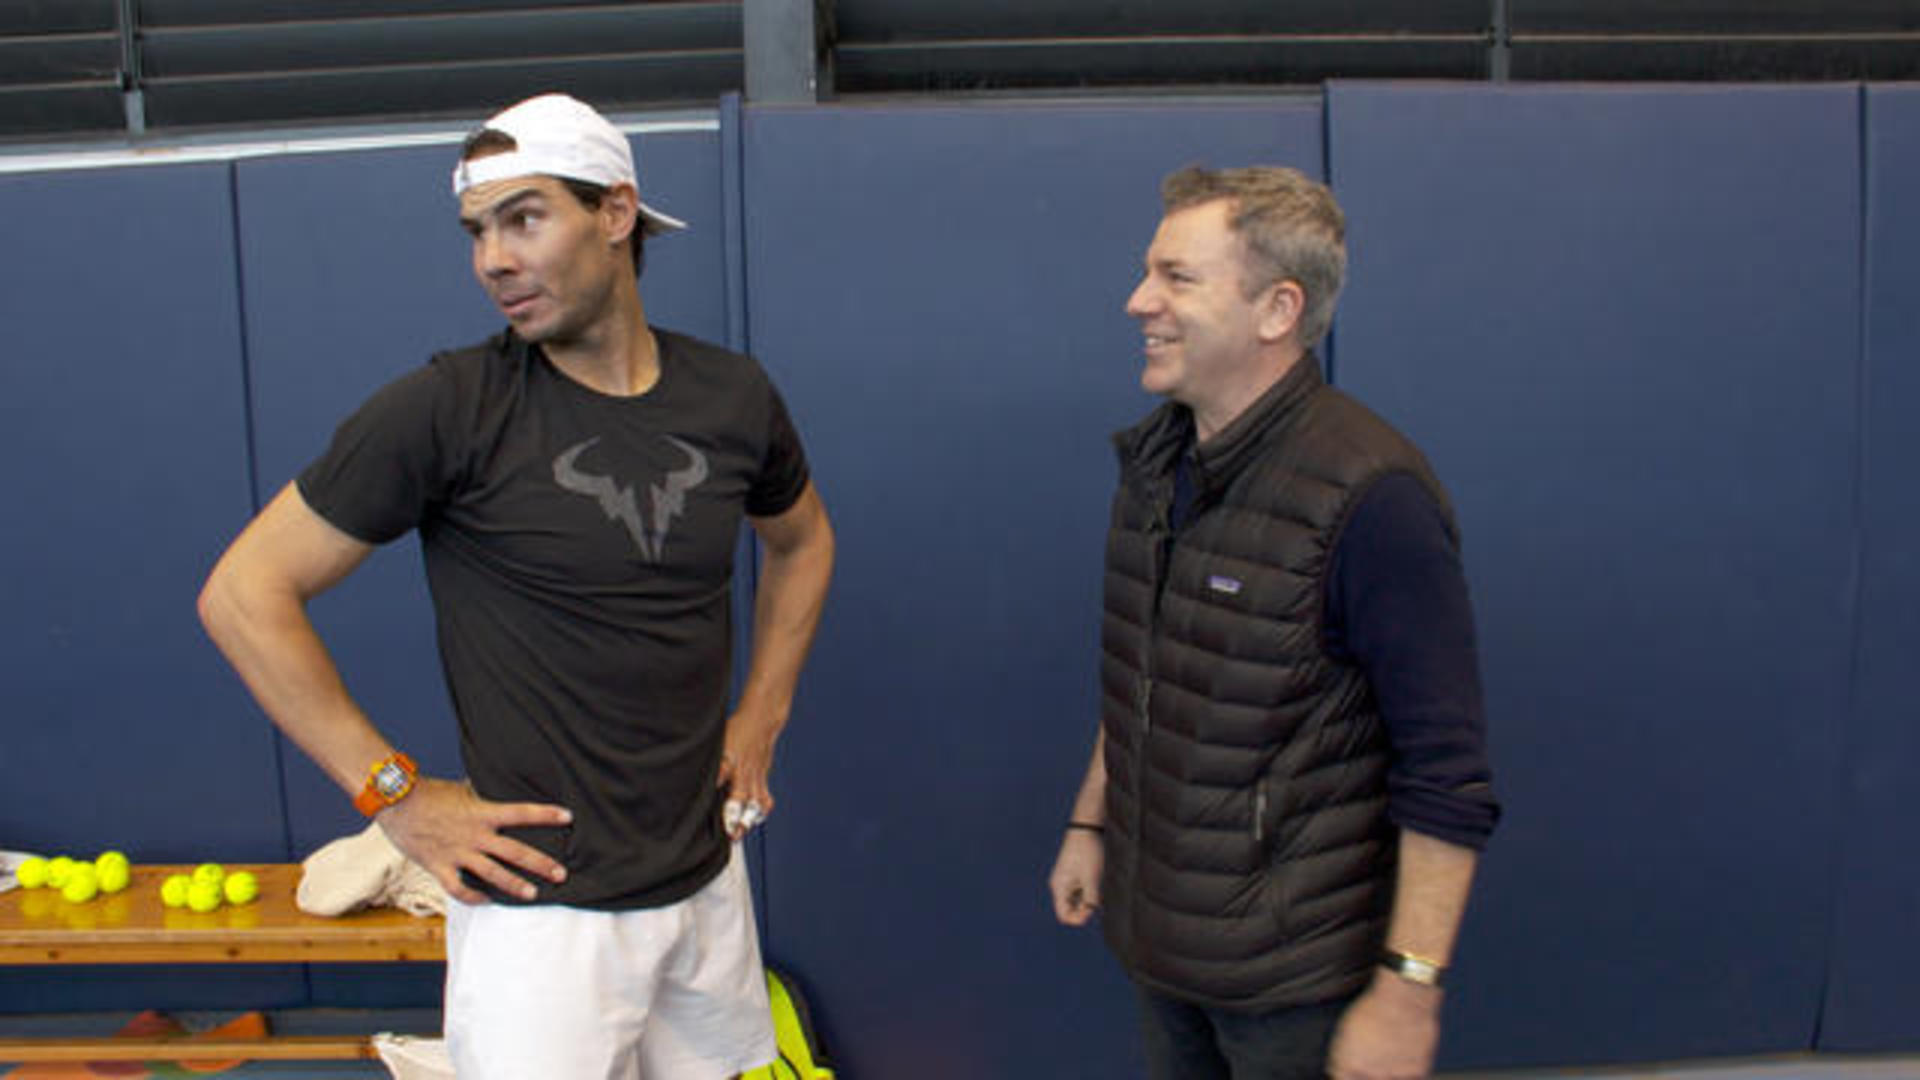 Rafael Nadal says self-doubt is the key to his success - CBS News